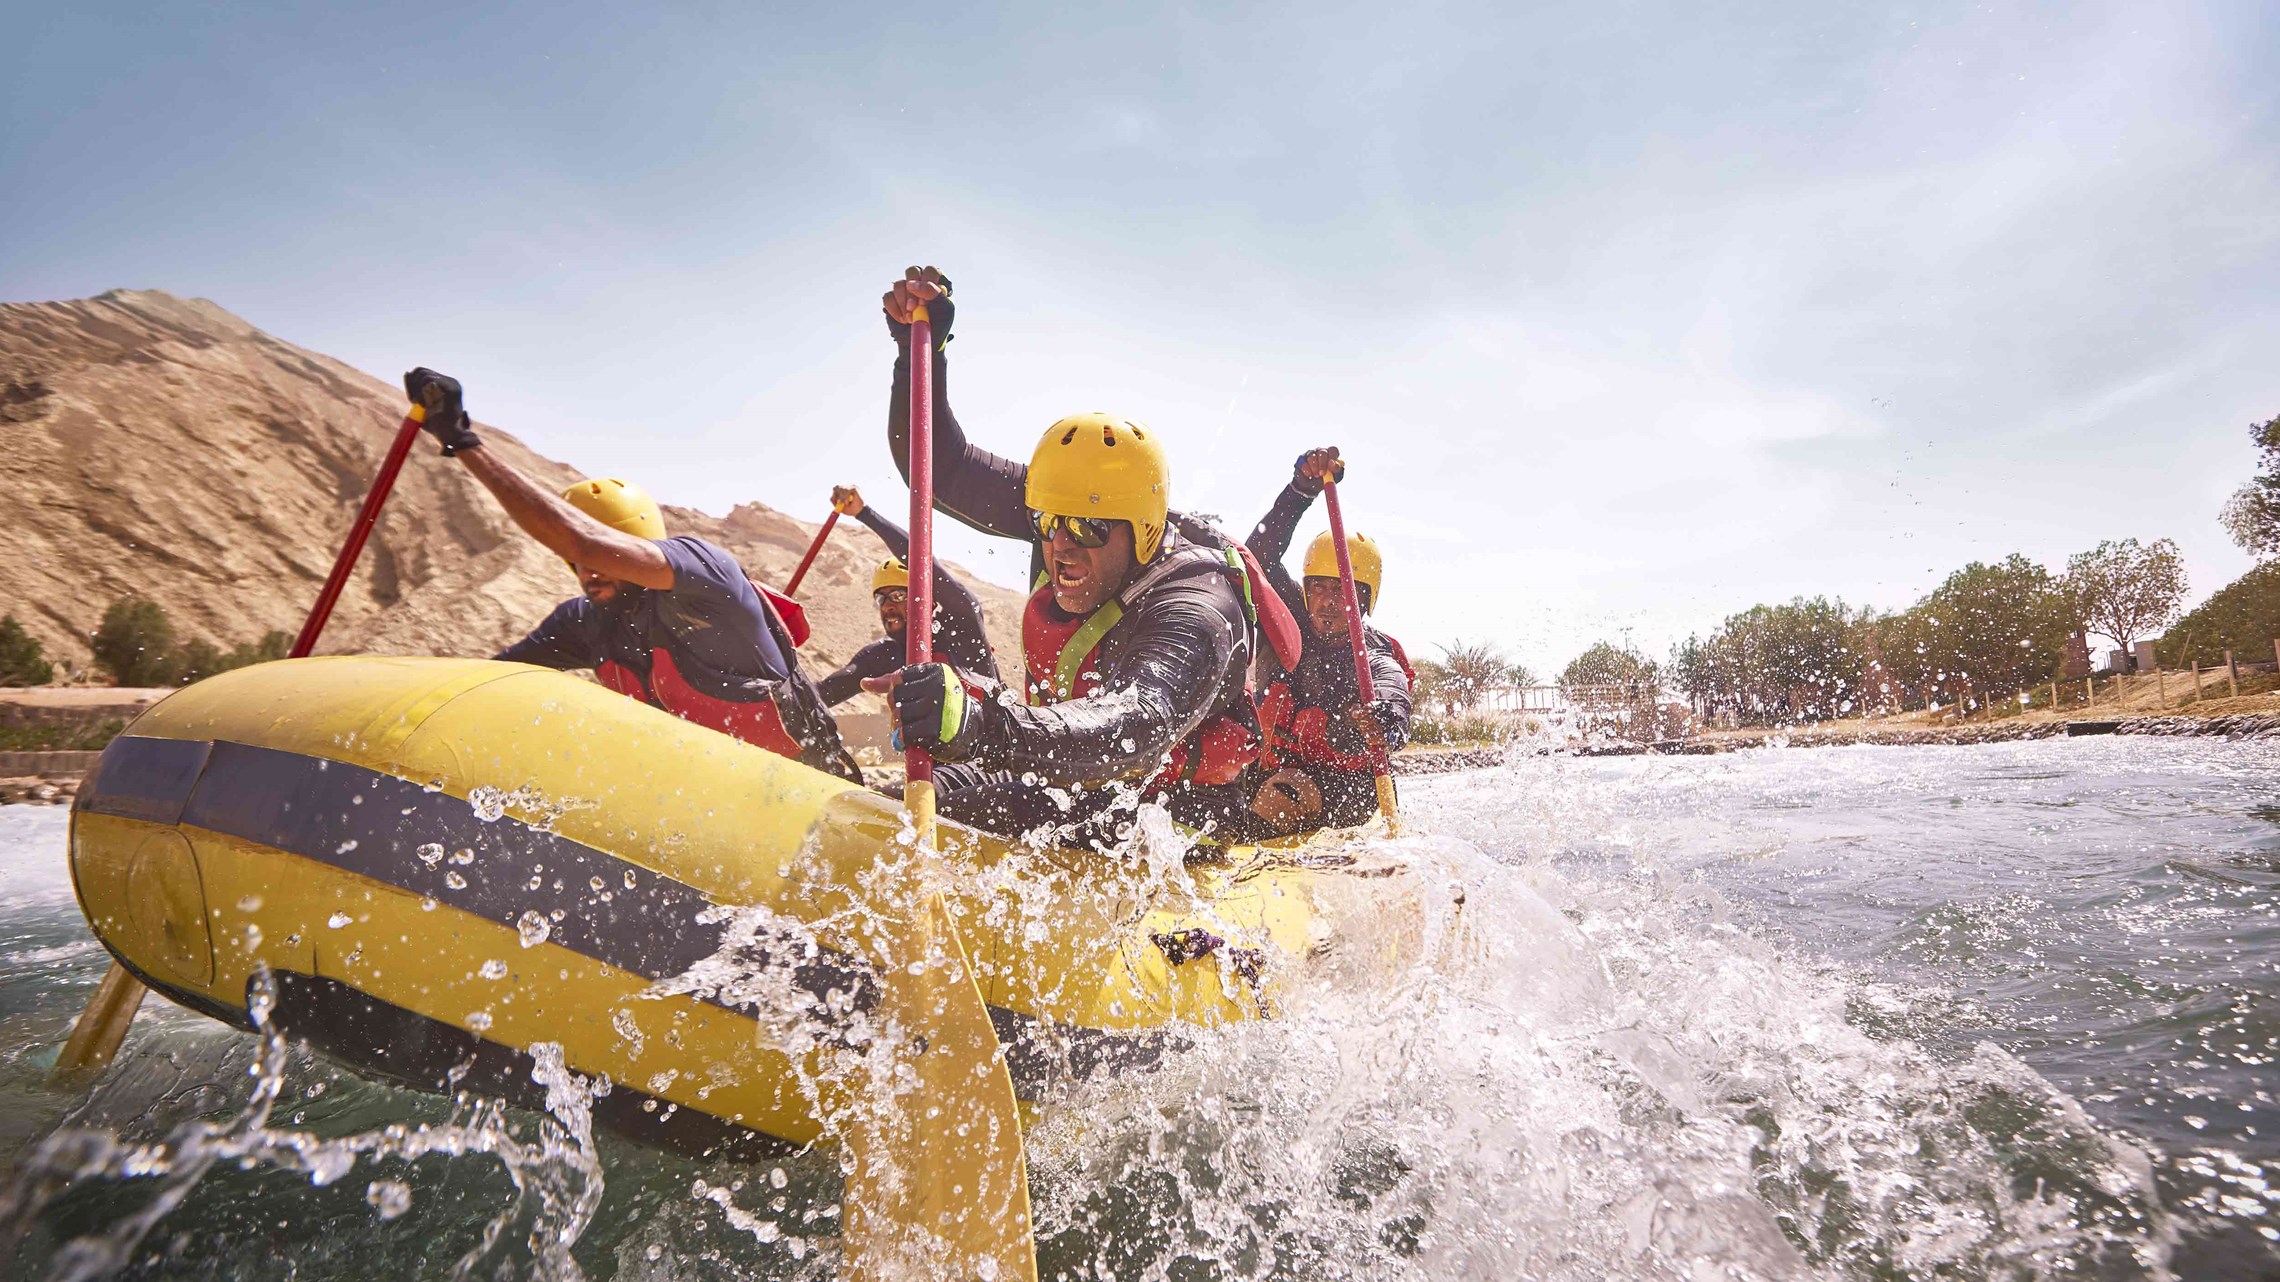 Four men aggressively paddling a yellow inflatable boat against the water in Al Ain